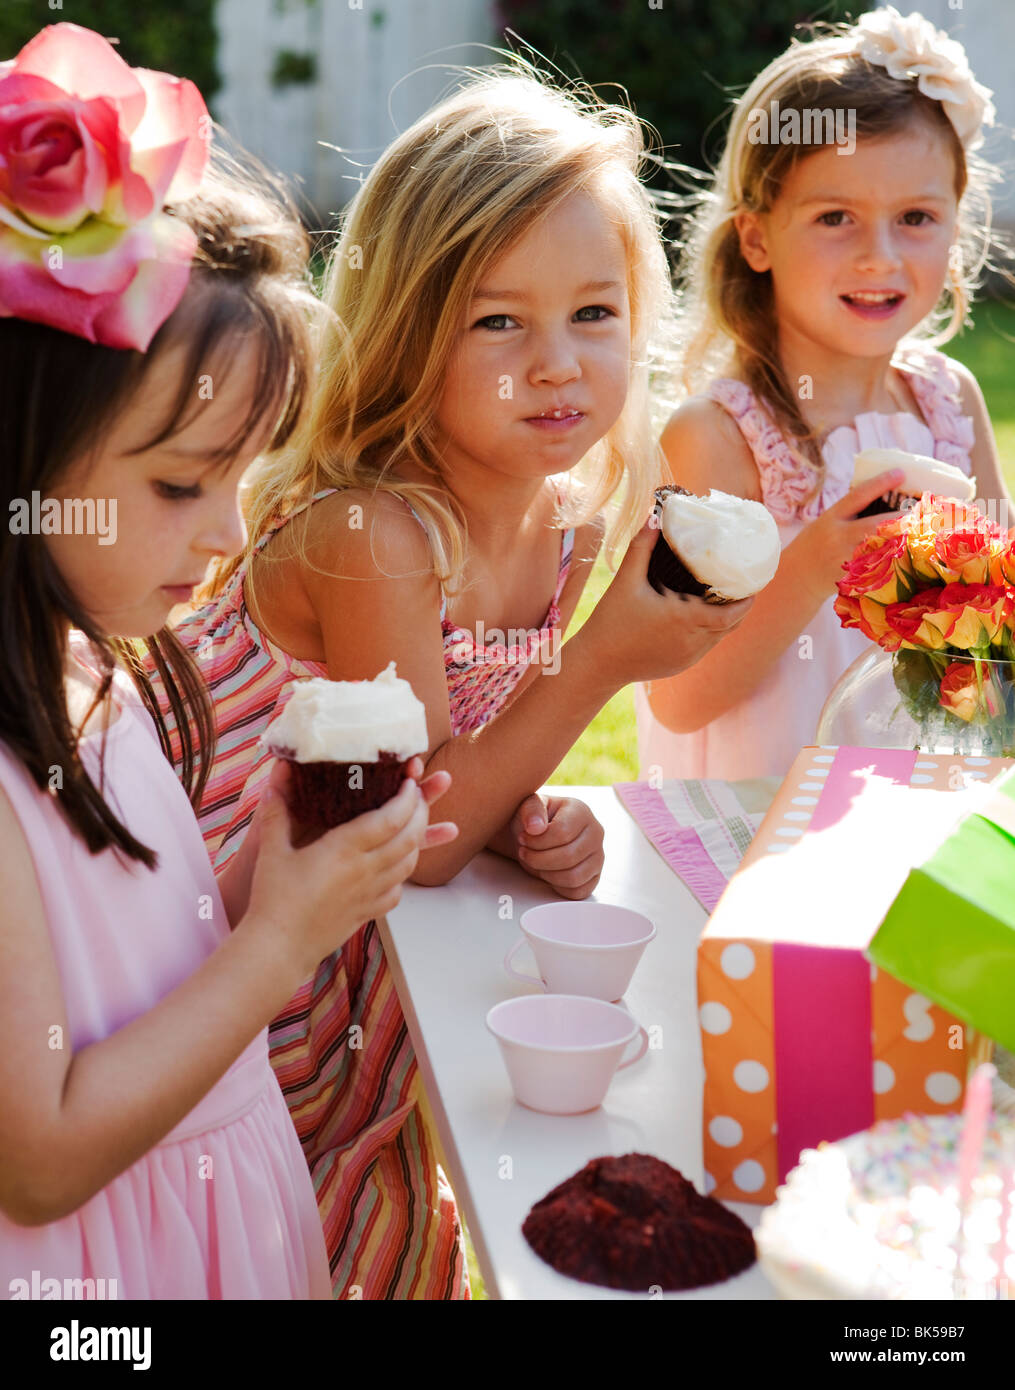 Young girls eating cupcakes at a birthday party Stock Photo